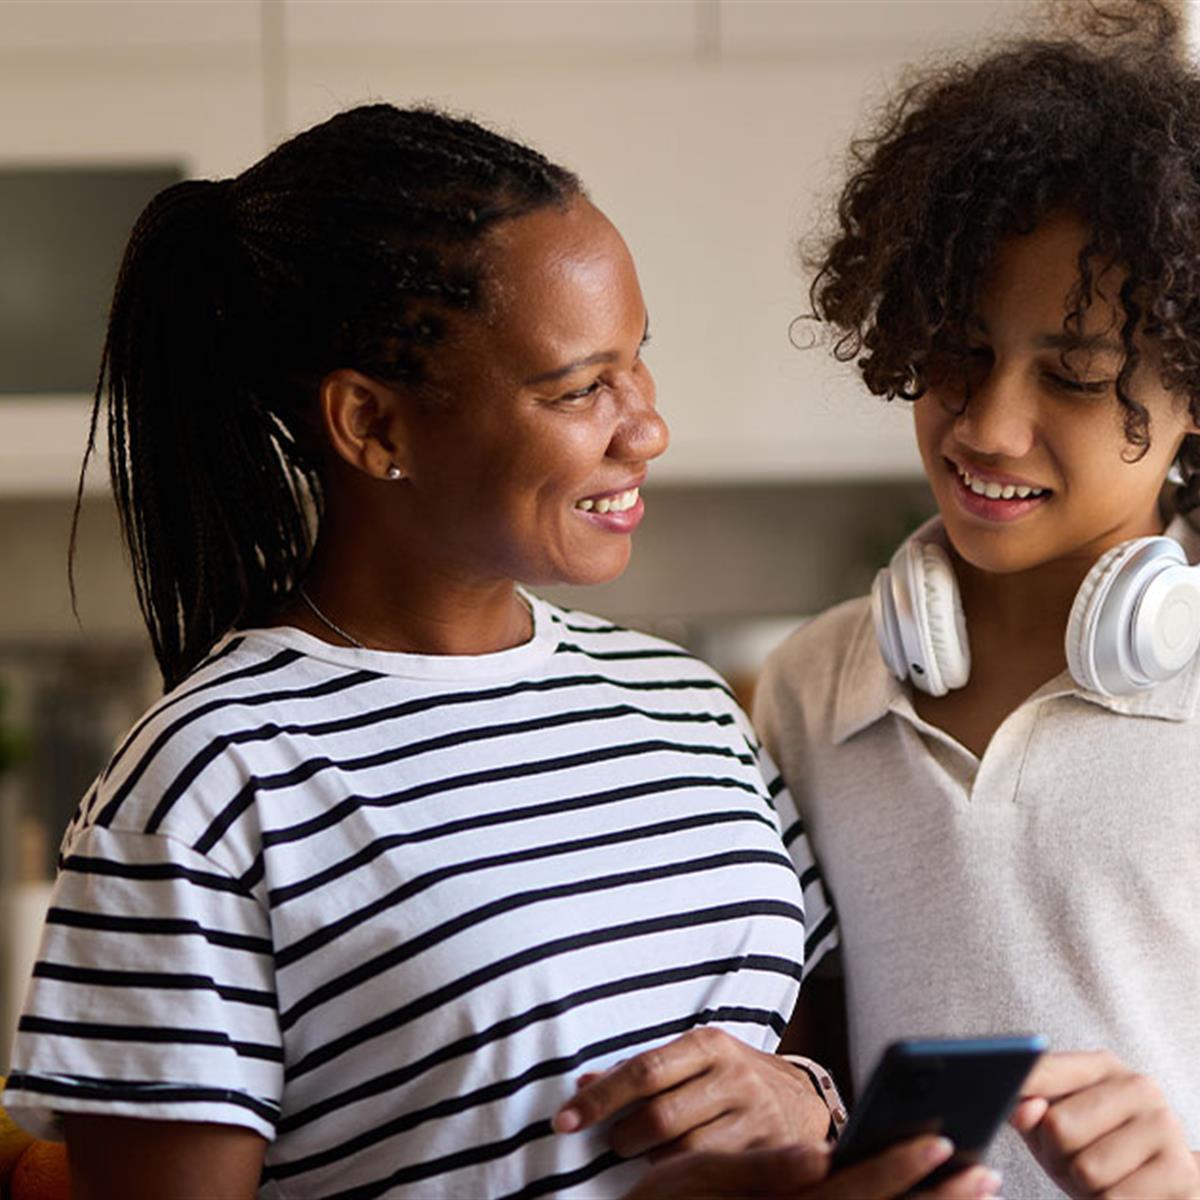 Kids & Tech: 12 Tips for Parents in the Digital Age - HealthyChildren.org